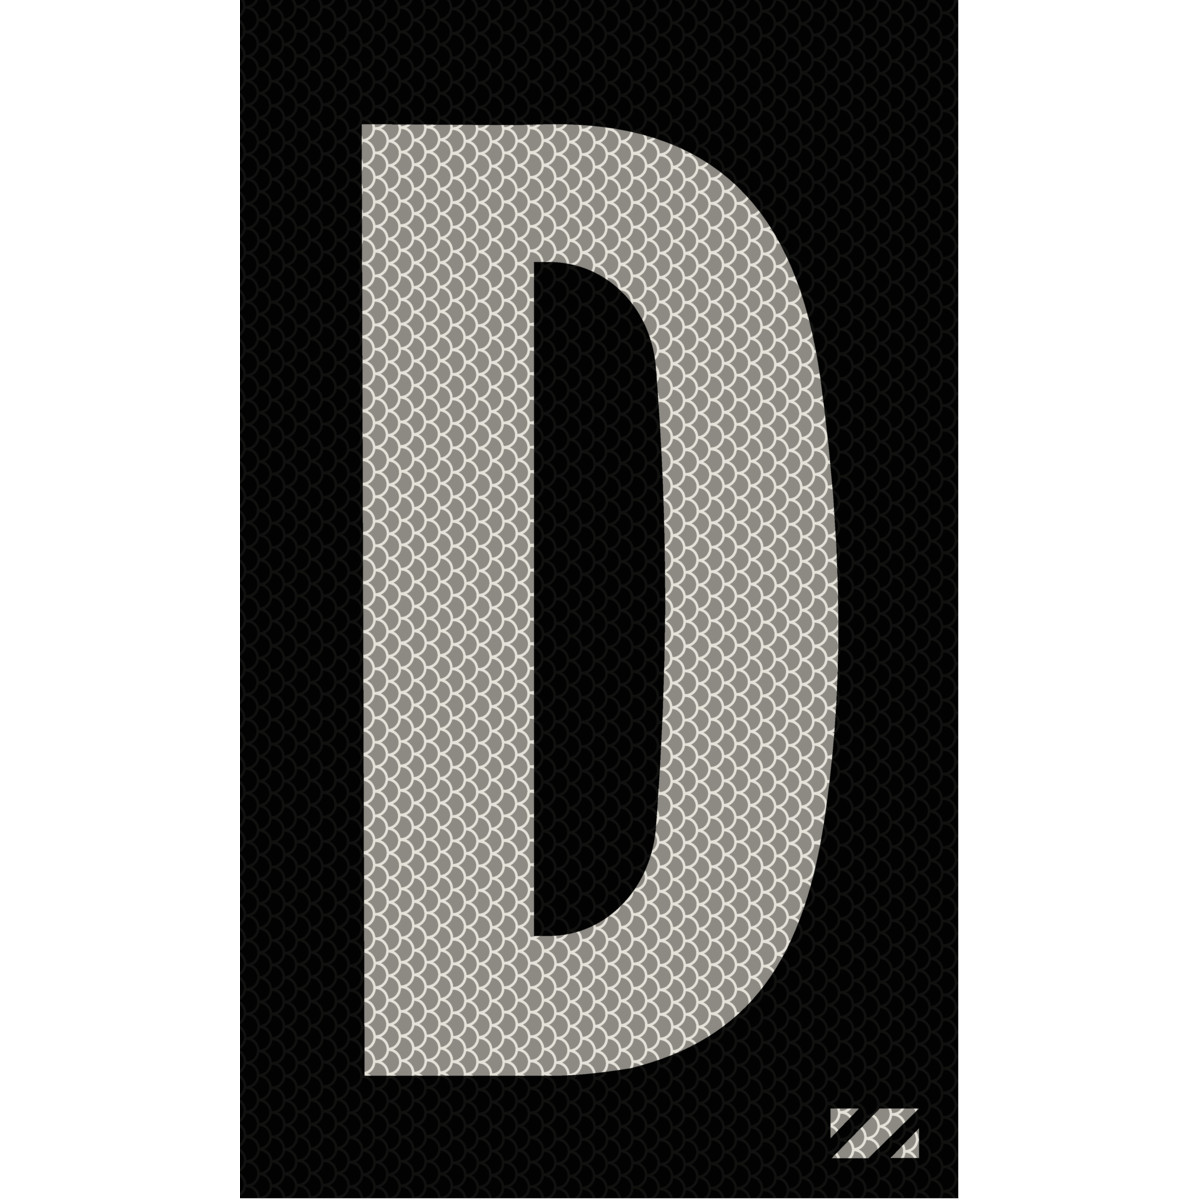 2" Silver on Black High Intensity Reflective "D"